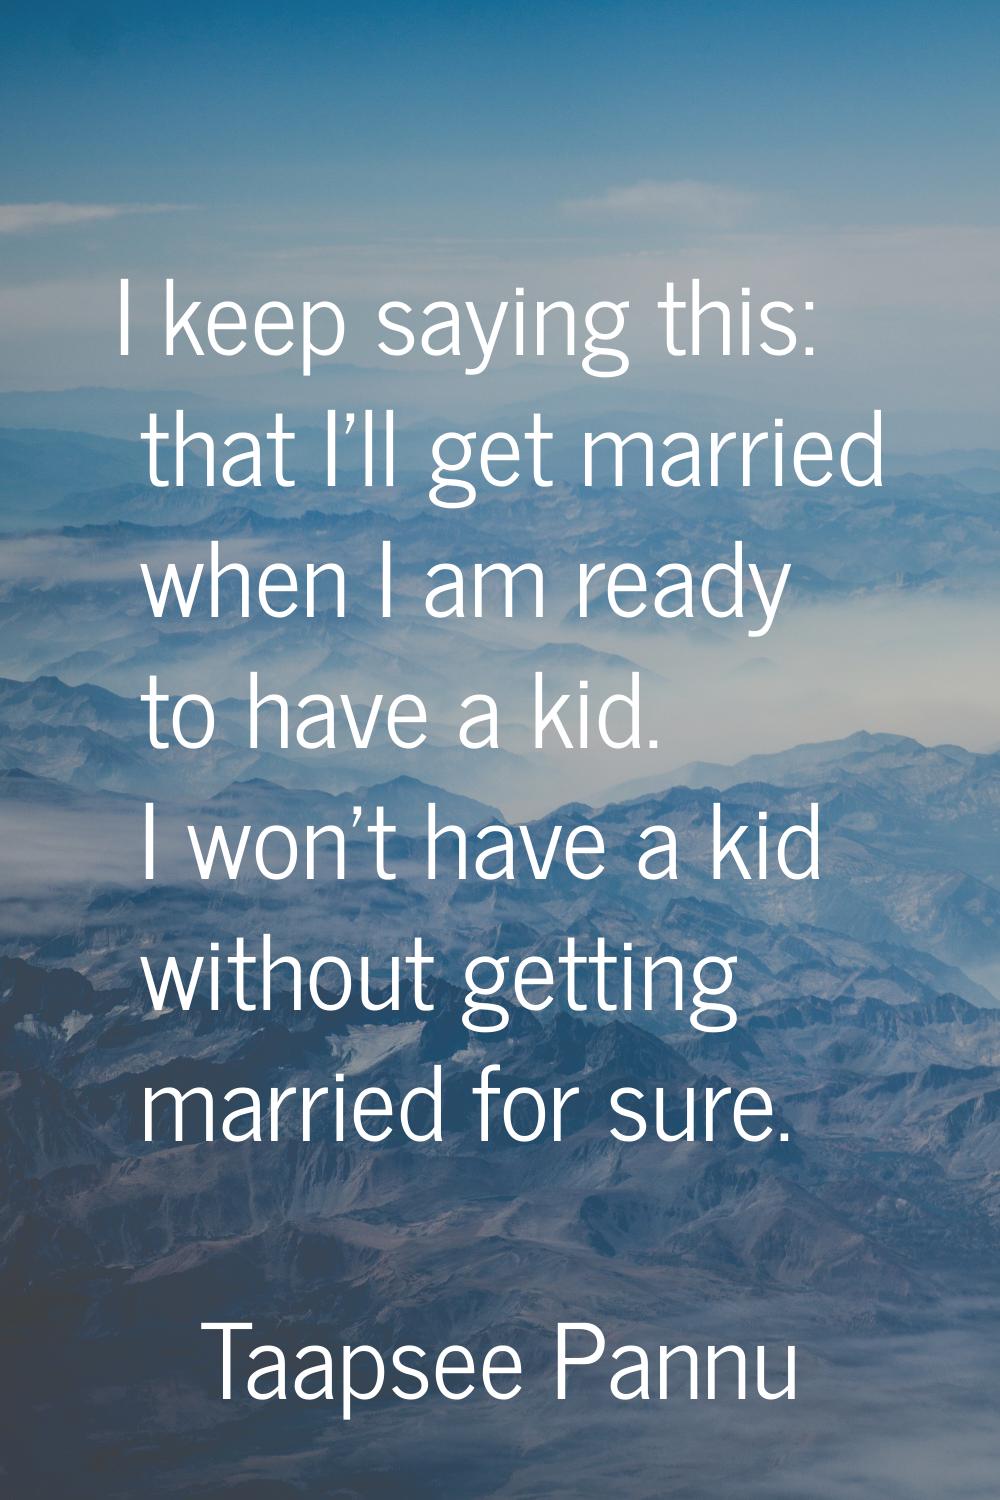 I keep saying this: that I'll get married when I am ready to have a kid. I won't have a kid without